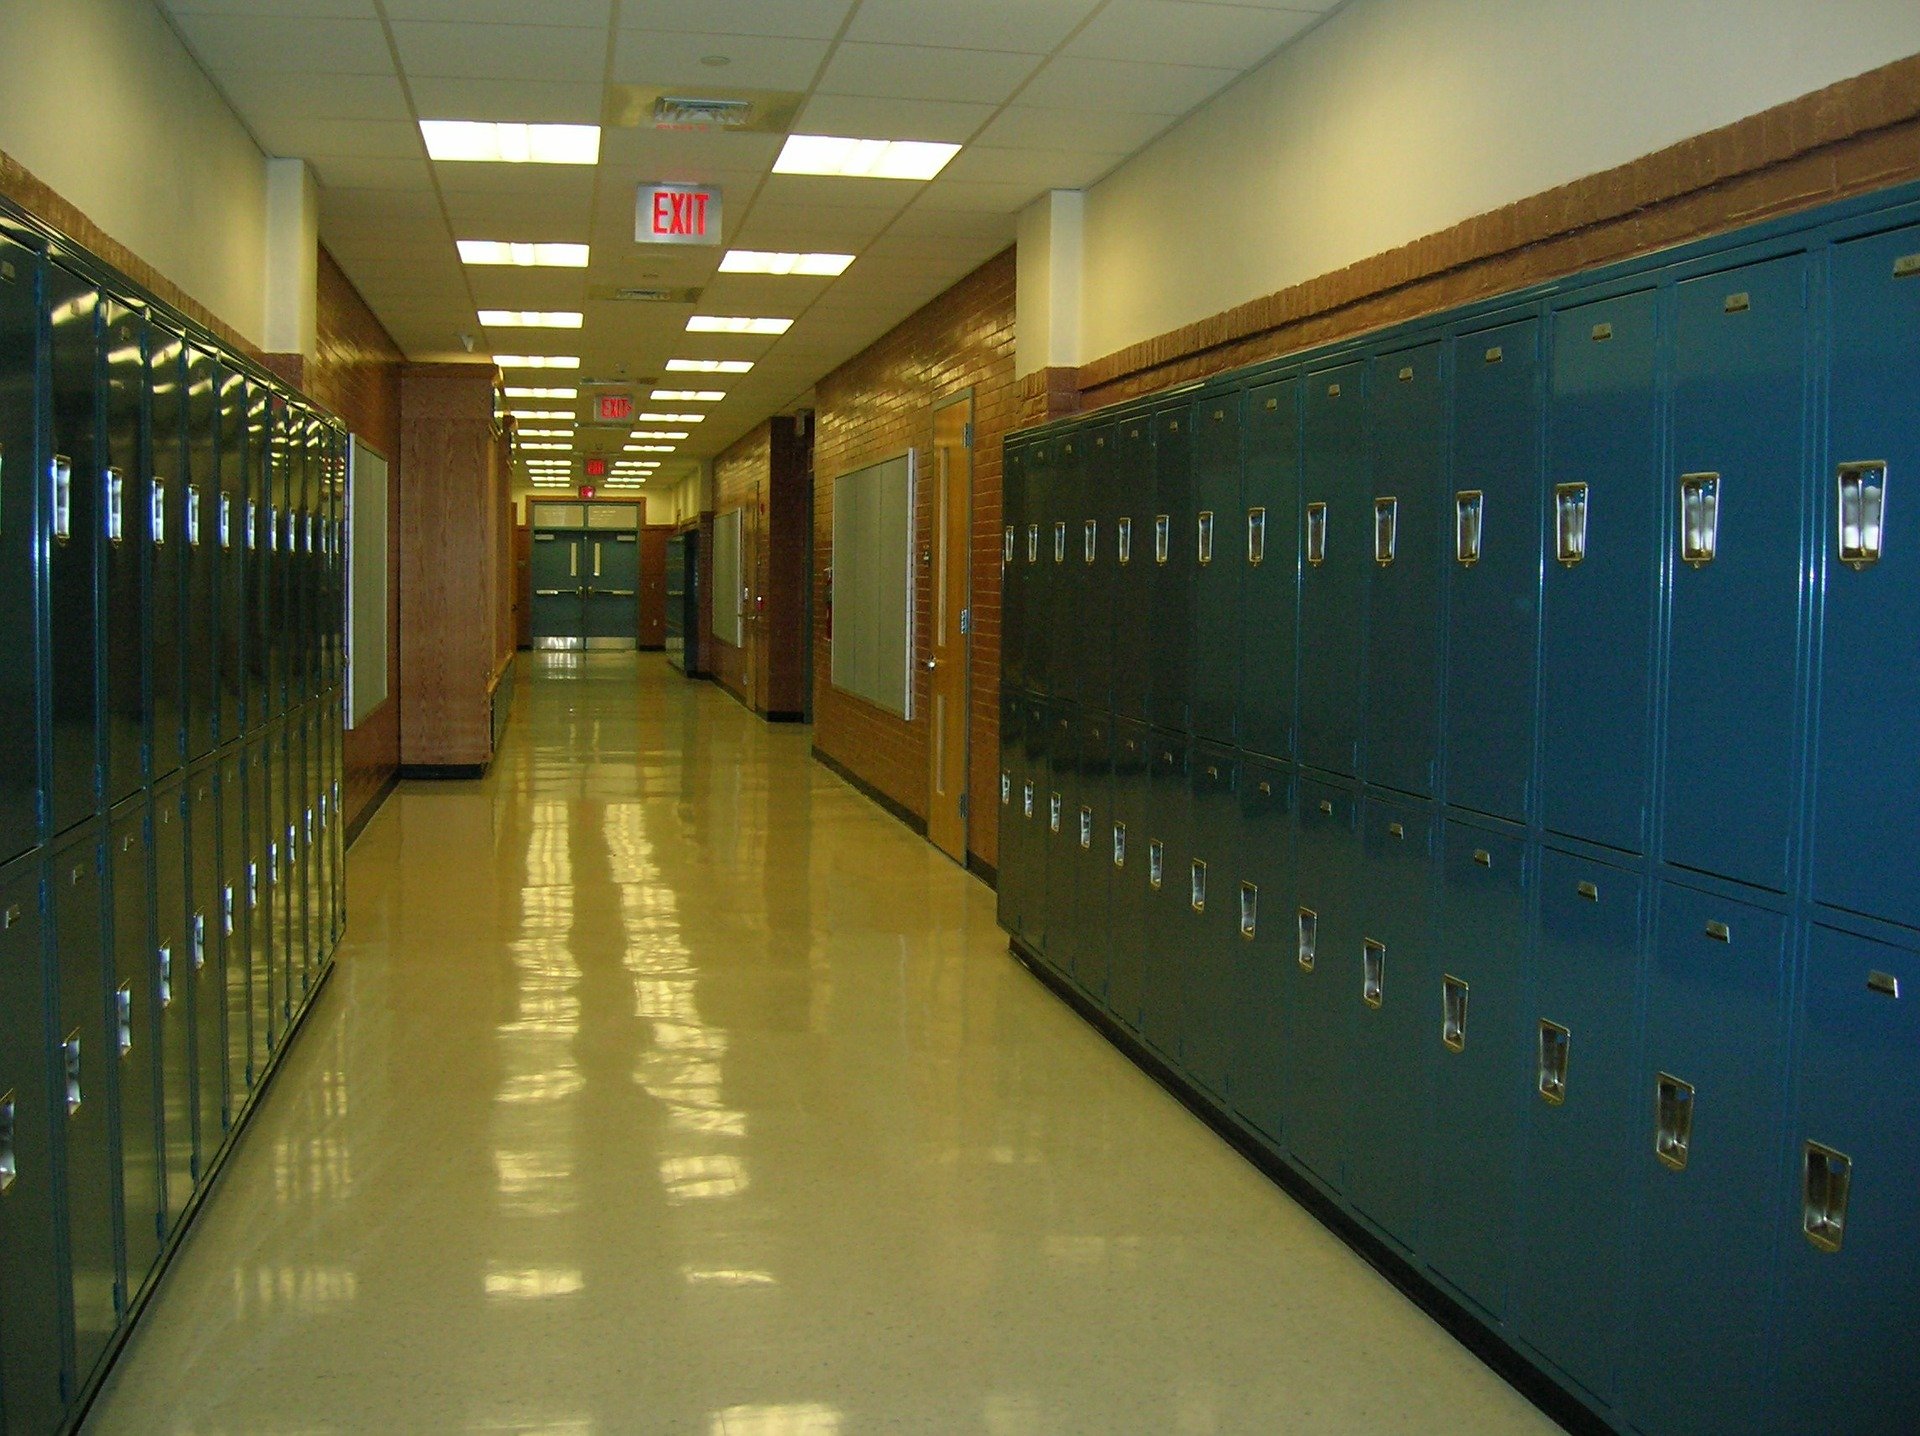 School lockers. Pixabay License Free for commercial use No attribution required